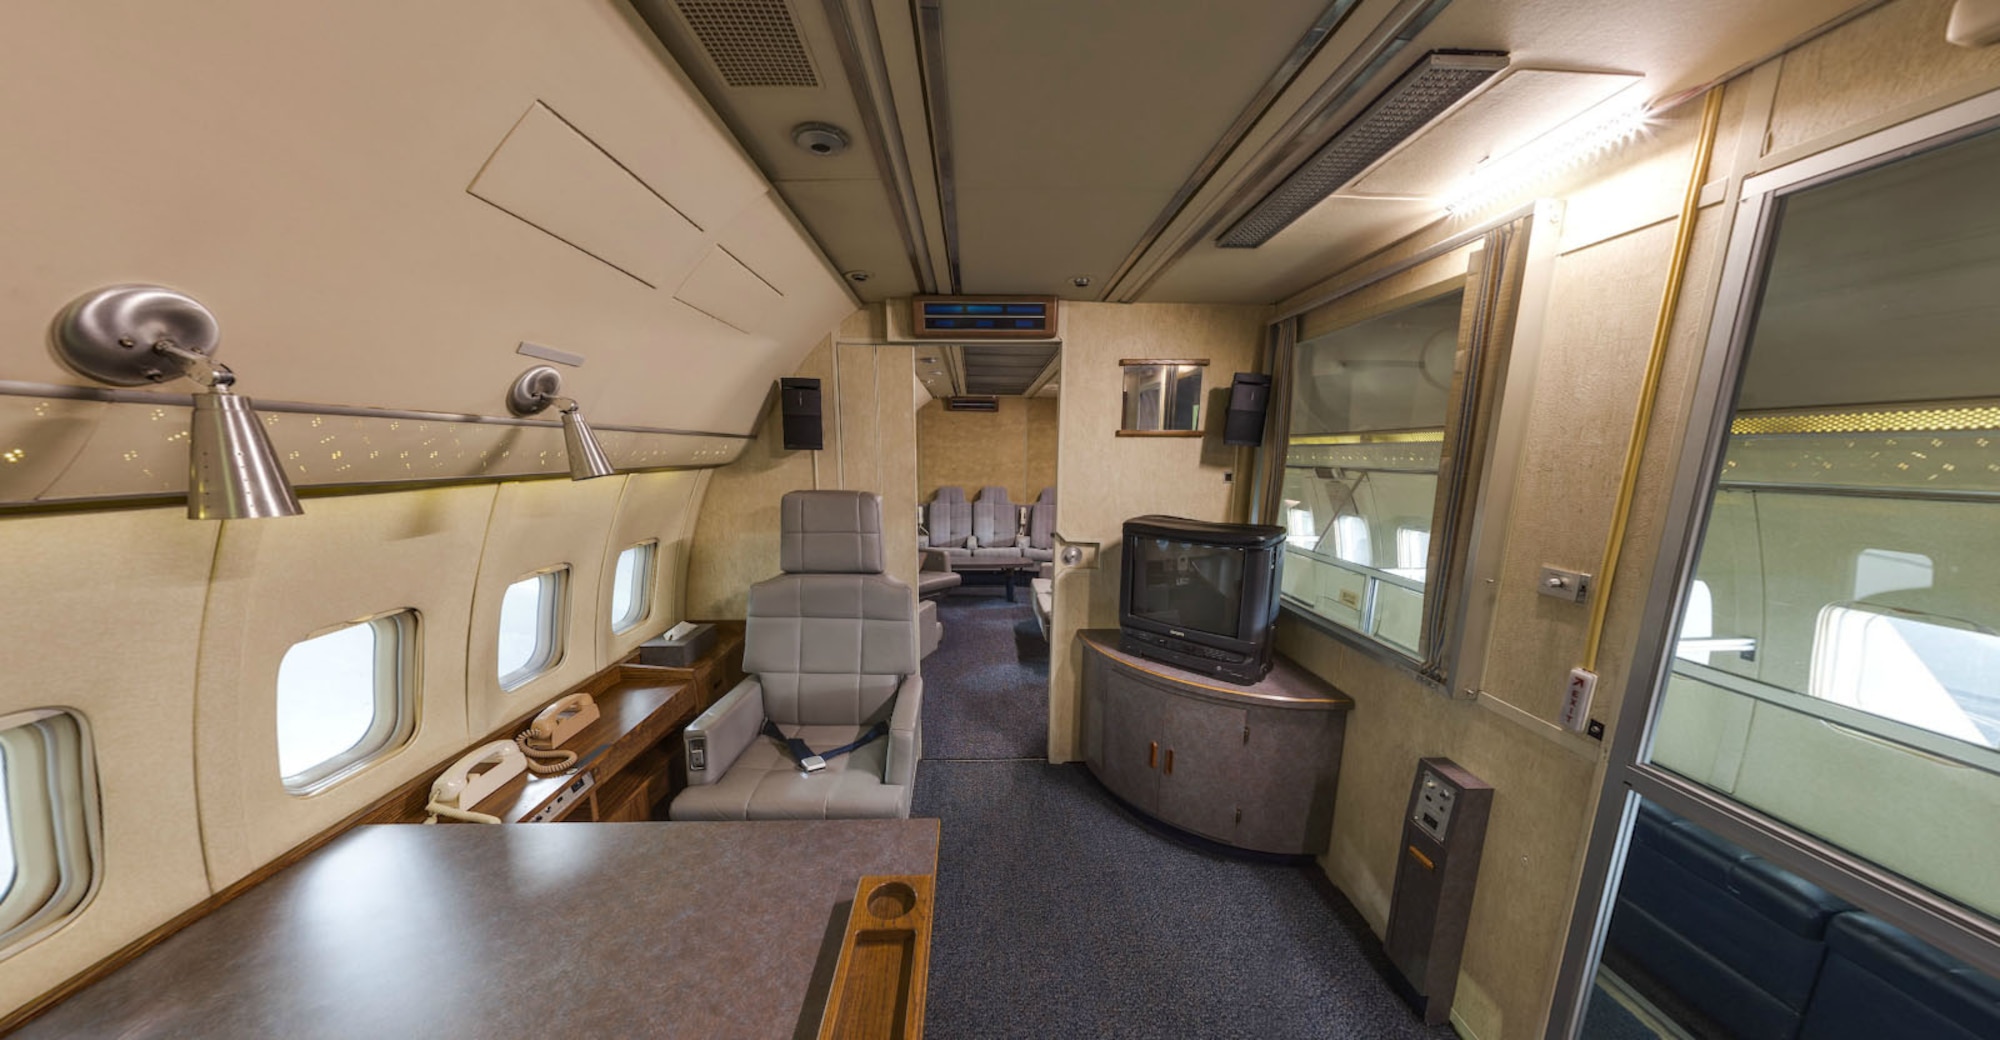 DAYTON, Ohio -- Presidential private suite, looking towards the State Room of Boeing VC-137C SAM 26000 (Air Force One) at the National Museum of the U.S. Air Force. This photo is part of the free ACI Cockpit360º app, which features high-definition panoramic photos of more than 20 cockpits from many well-known aircraft on display at the National Museum of the U.S. Air Force. (Photo courtesy of Lyle Jansma, Aerocapture Images)